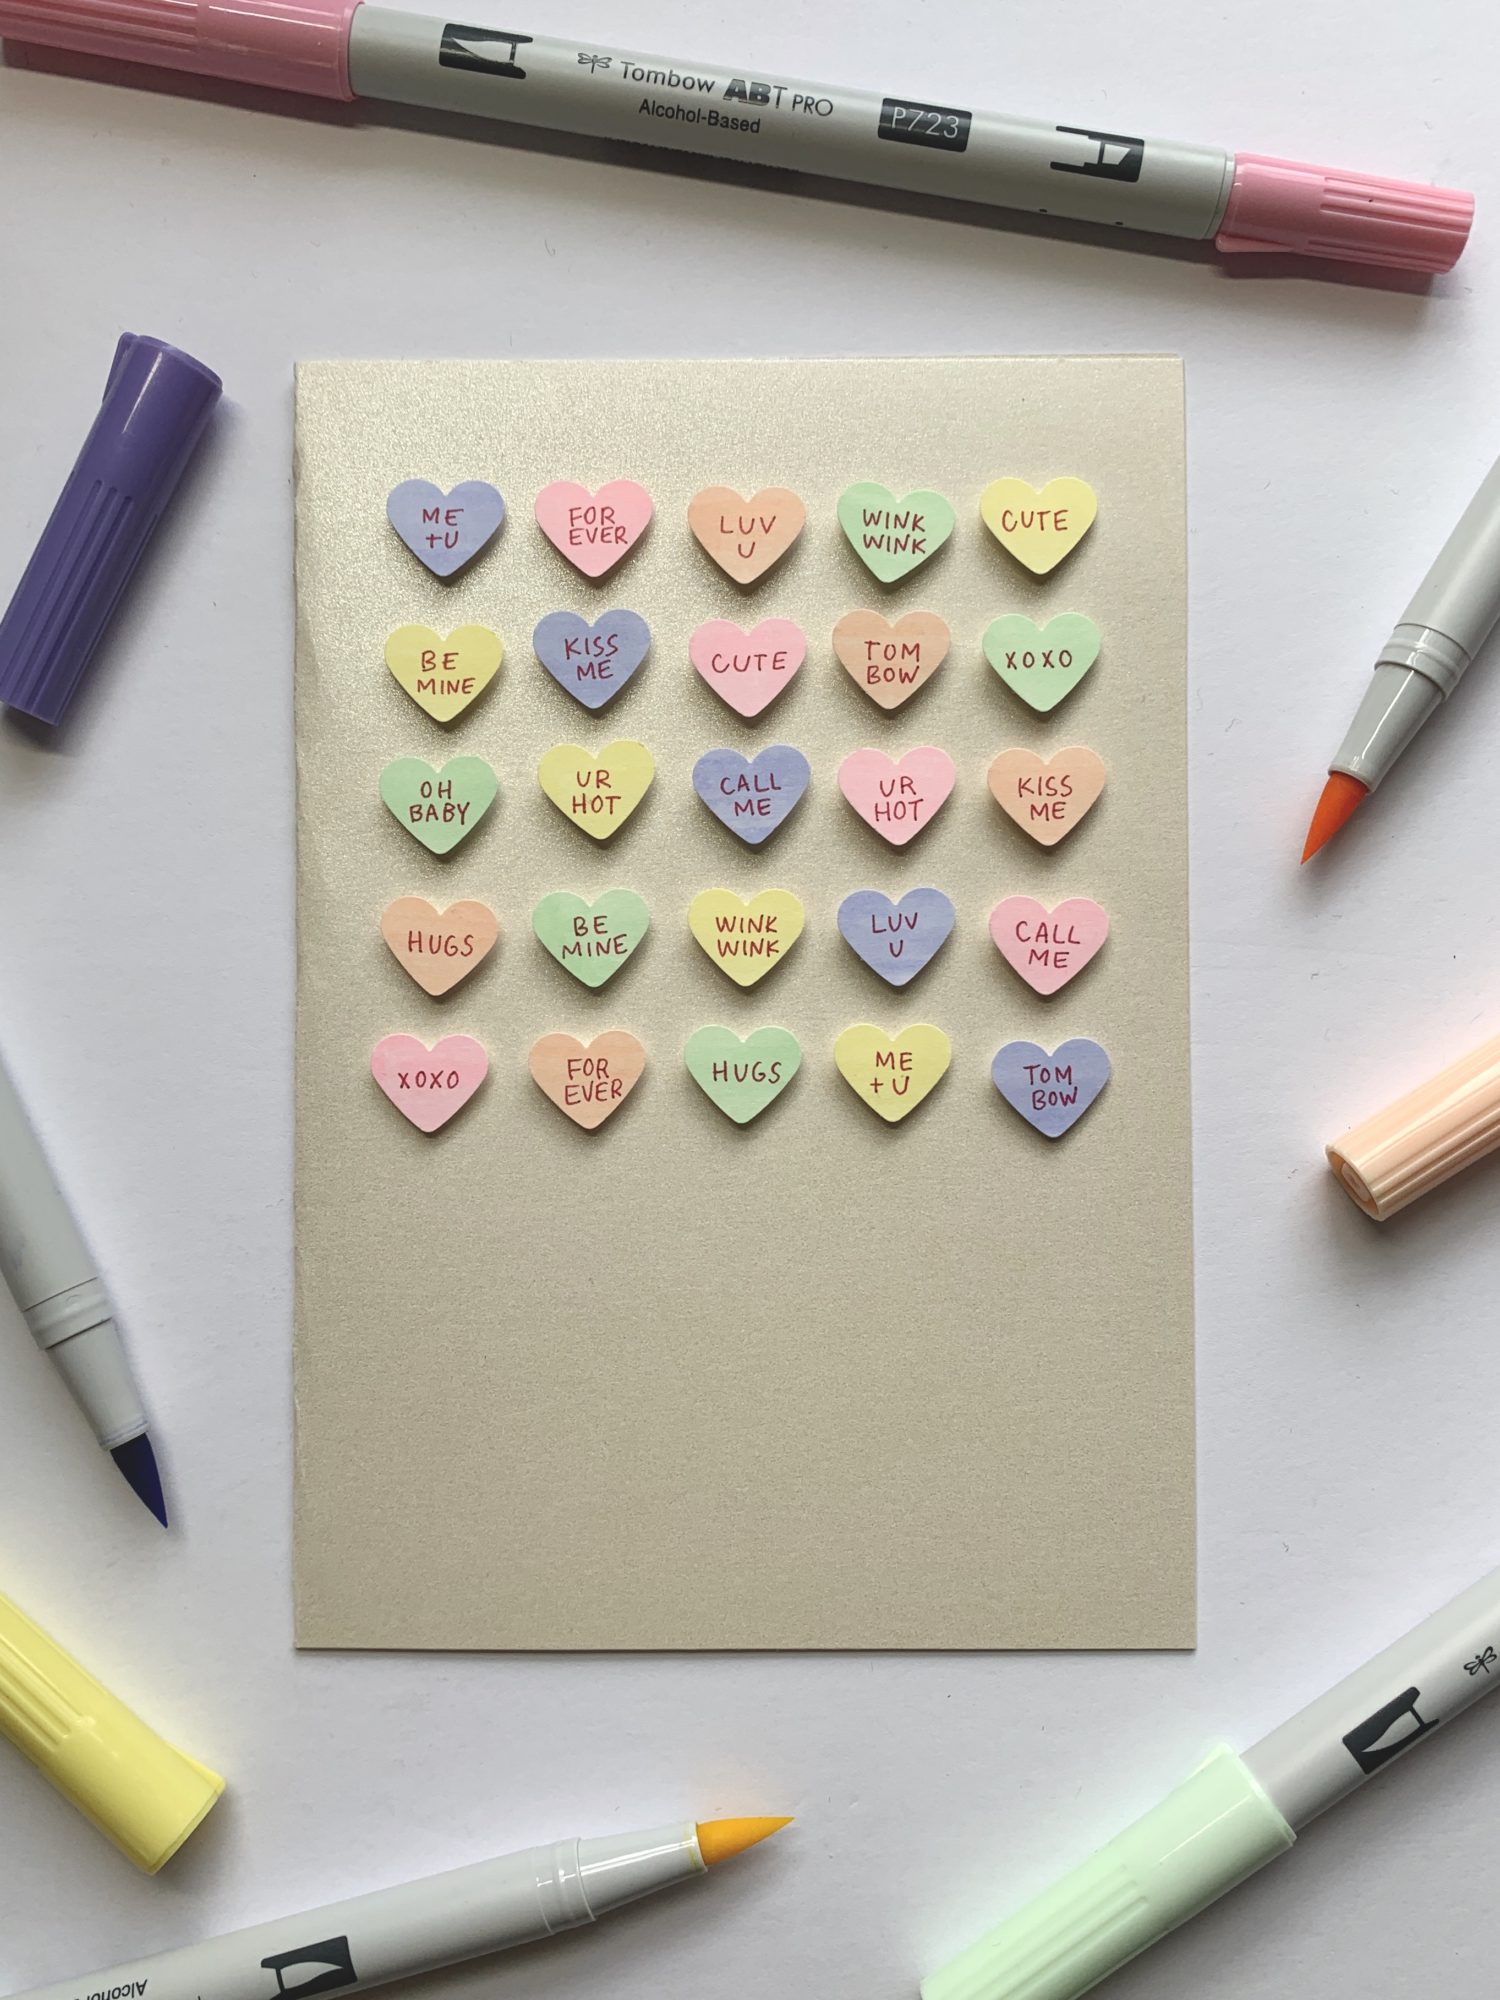 Make this candy heart card using @TombowUSA ABT PRO Alcohol Markers in this tutorial by @LePereLetters. #valentinesdaycraft #galentinesideas #candyhearts